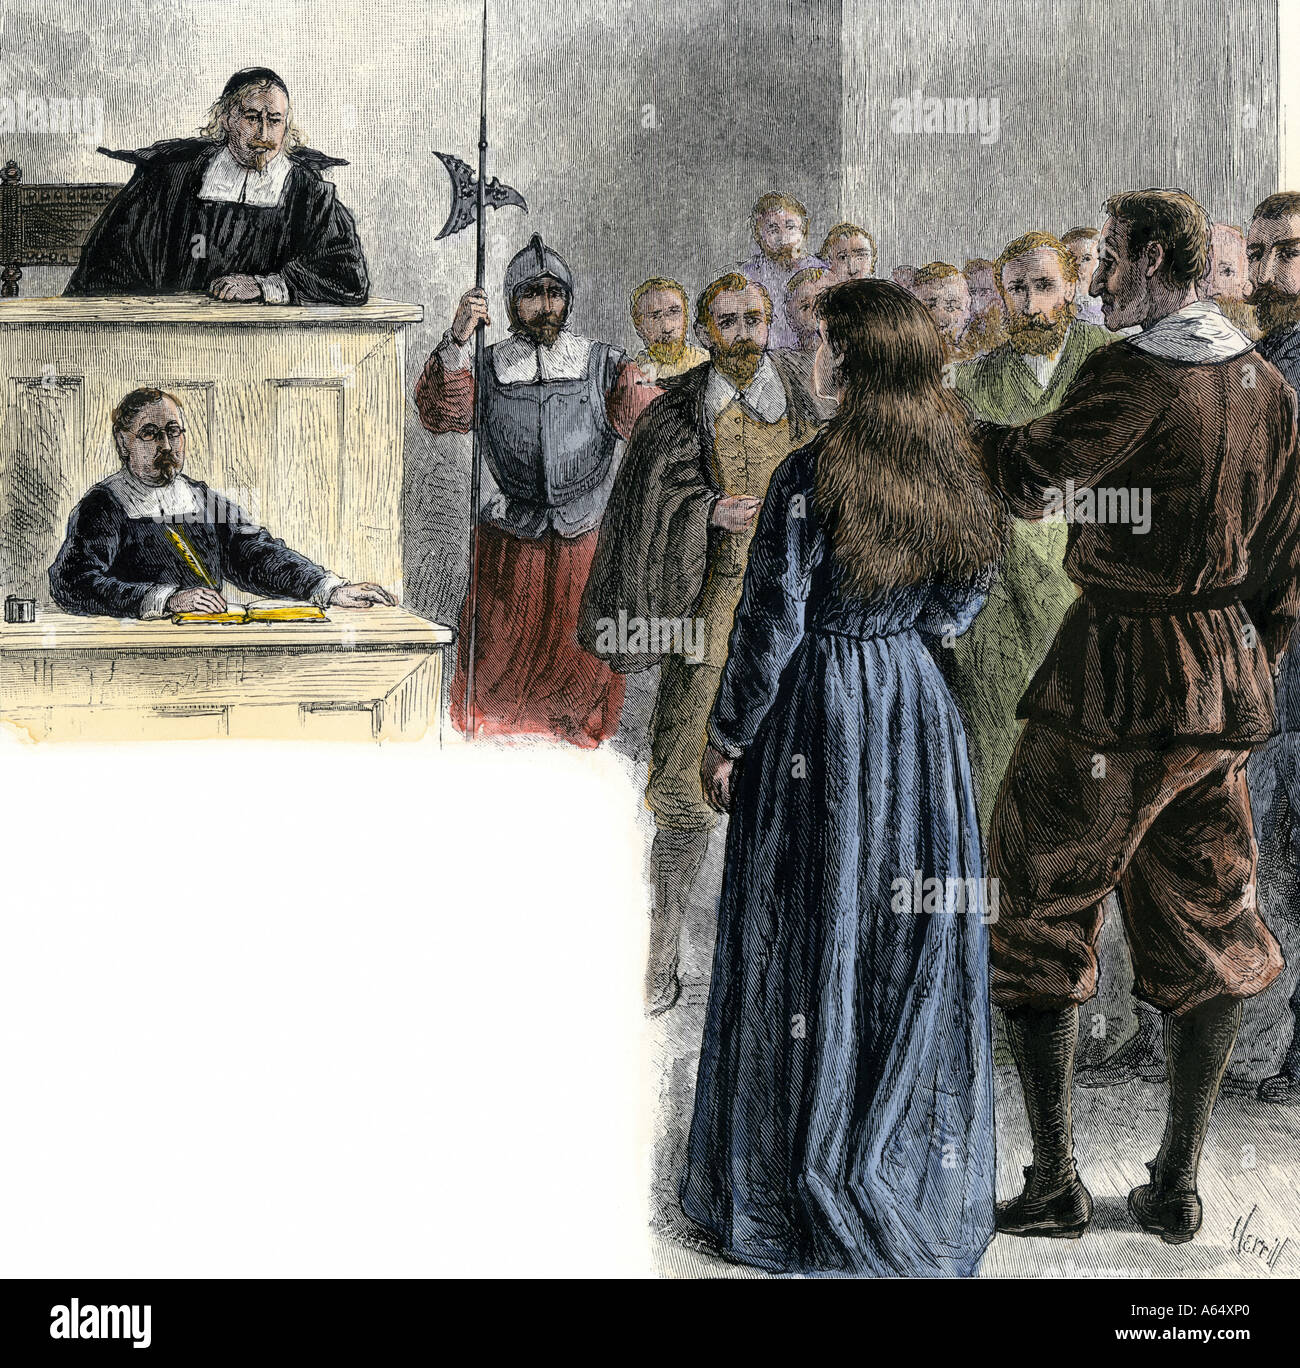 Courtroom scene in Massachusetts Bay Colony 1600s. Hand-colored woodcut Stock Photo